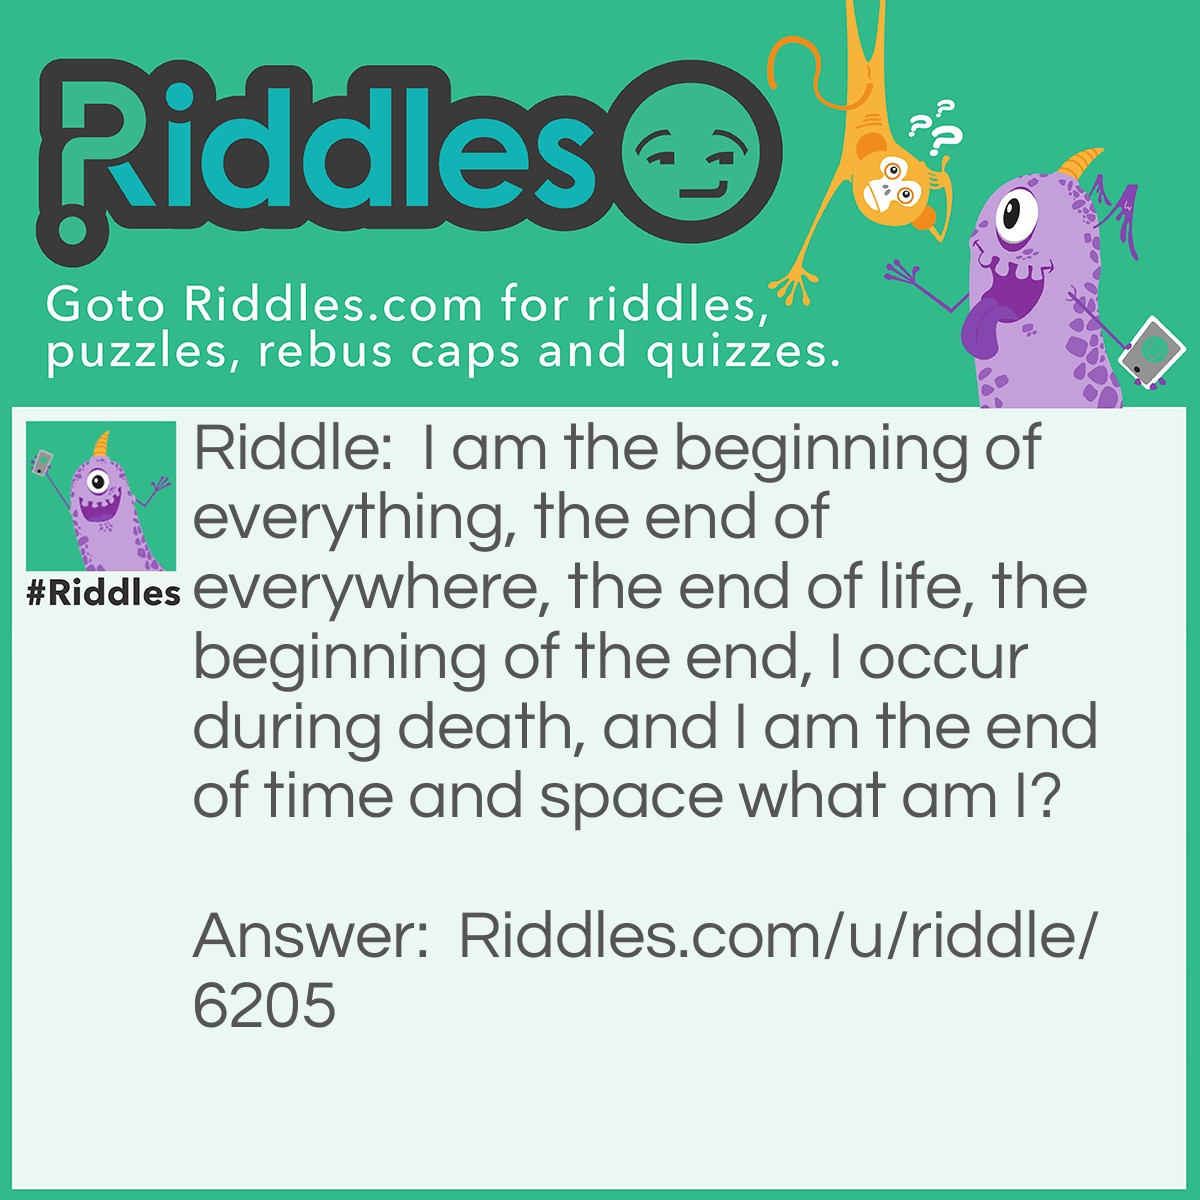 Riddle: I am the beginning of everything, the end of everywhere, the end of life, the beginning of the end, I occur during death, and I am the end of time and space what am I? Answer: The letter E.